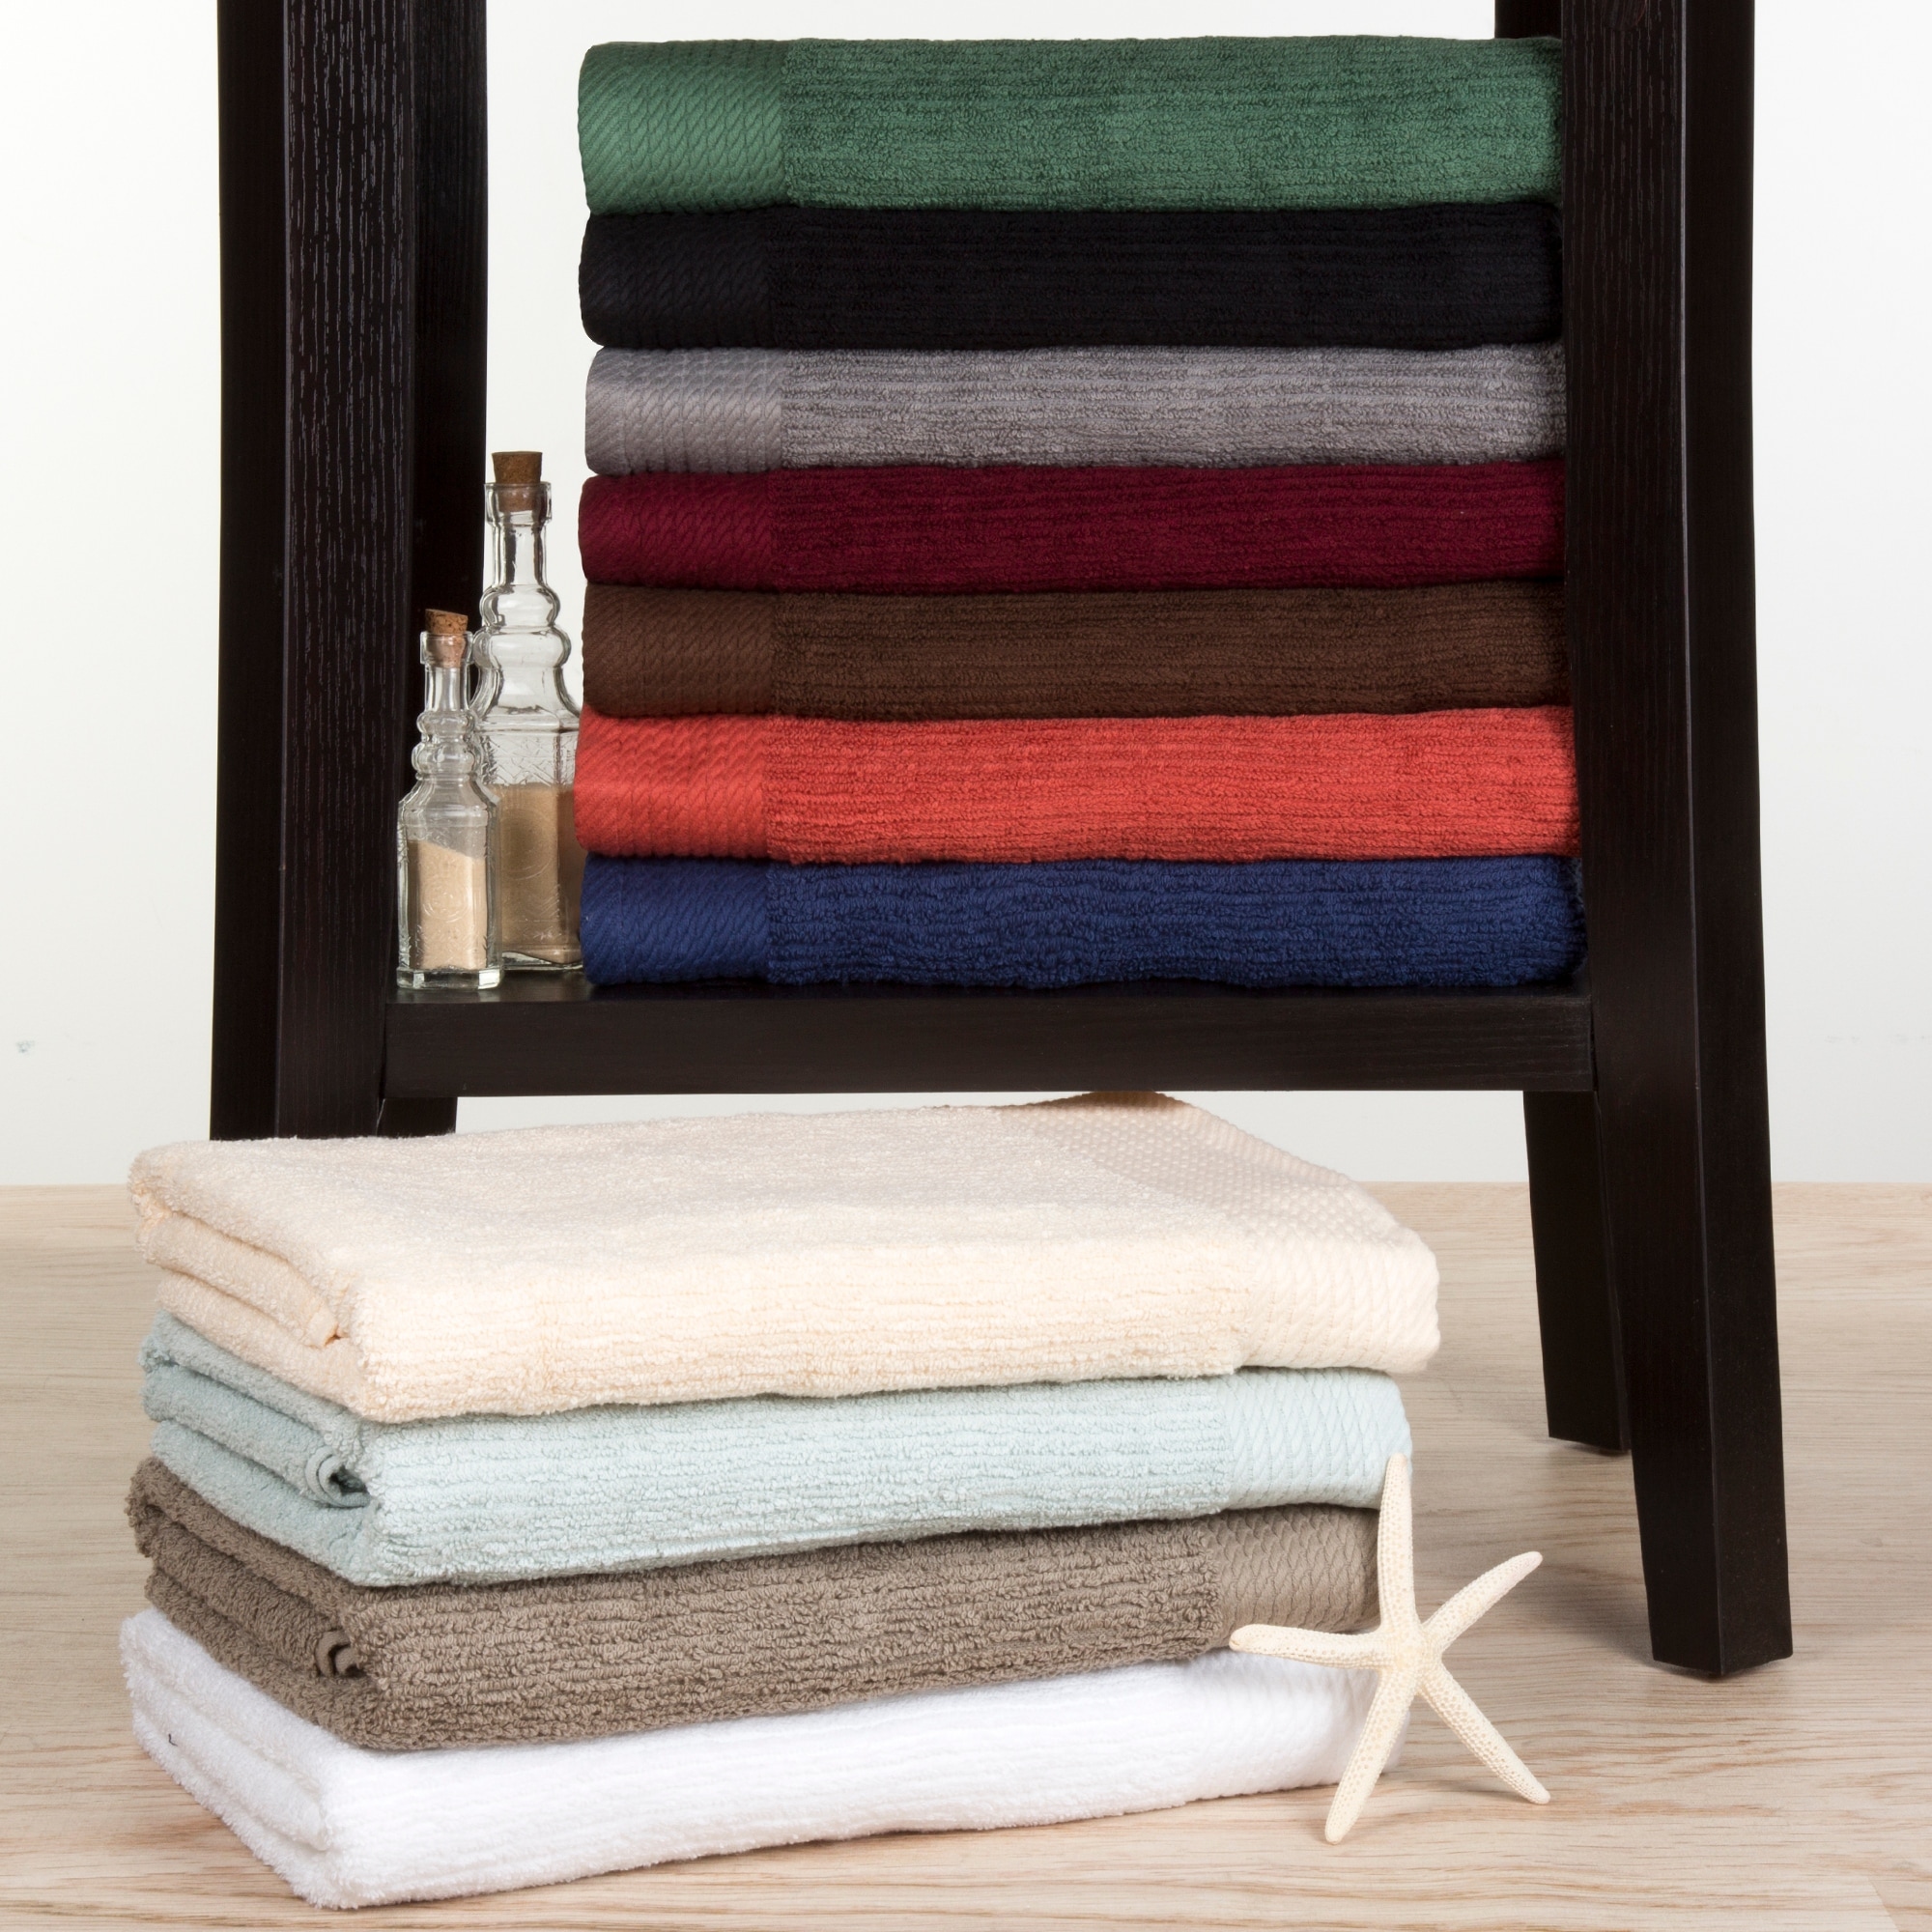 https://ak1.ostkcdn.com/images/products/is/images/direct/f051fb255d2b1468f4c2ad3780e8f8f77e401386/10-Piece-Bath-Towel-Set-by-Lavish-Home-%28White%29.jpg